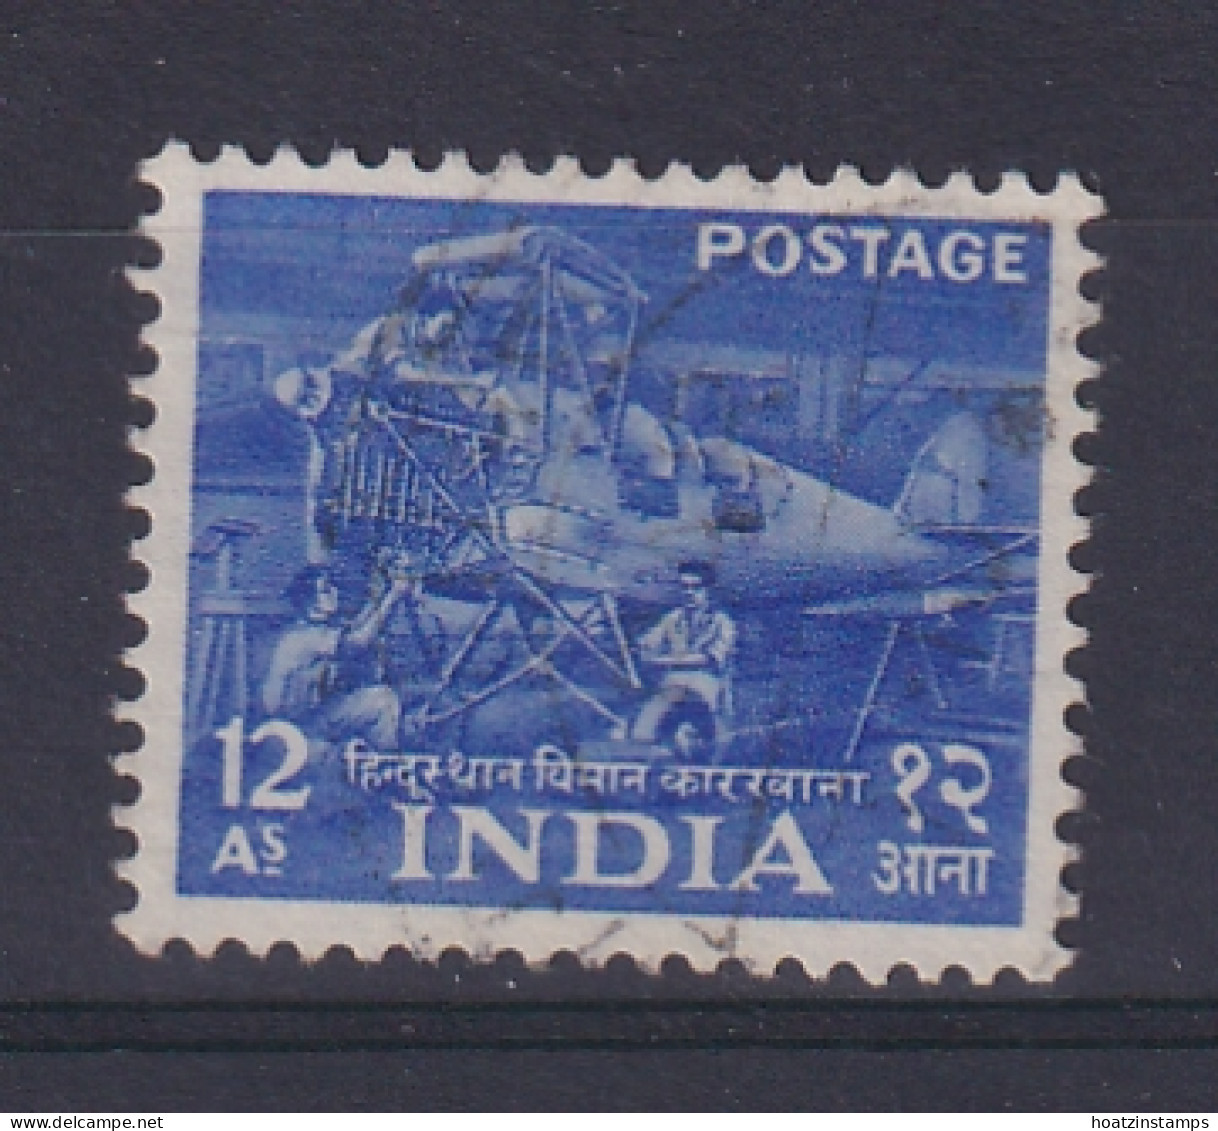 India: 1955   Five Year Plan    SG364    12a   Used - Gebraucht